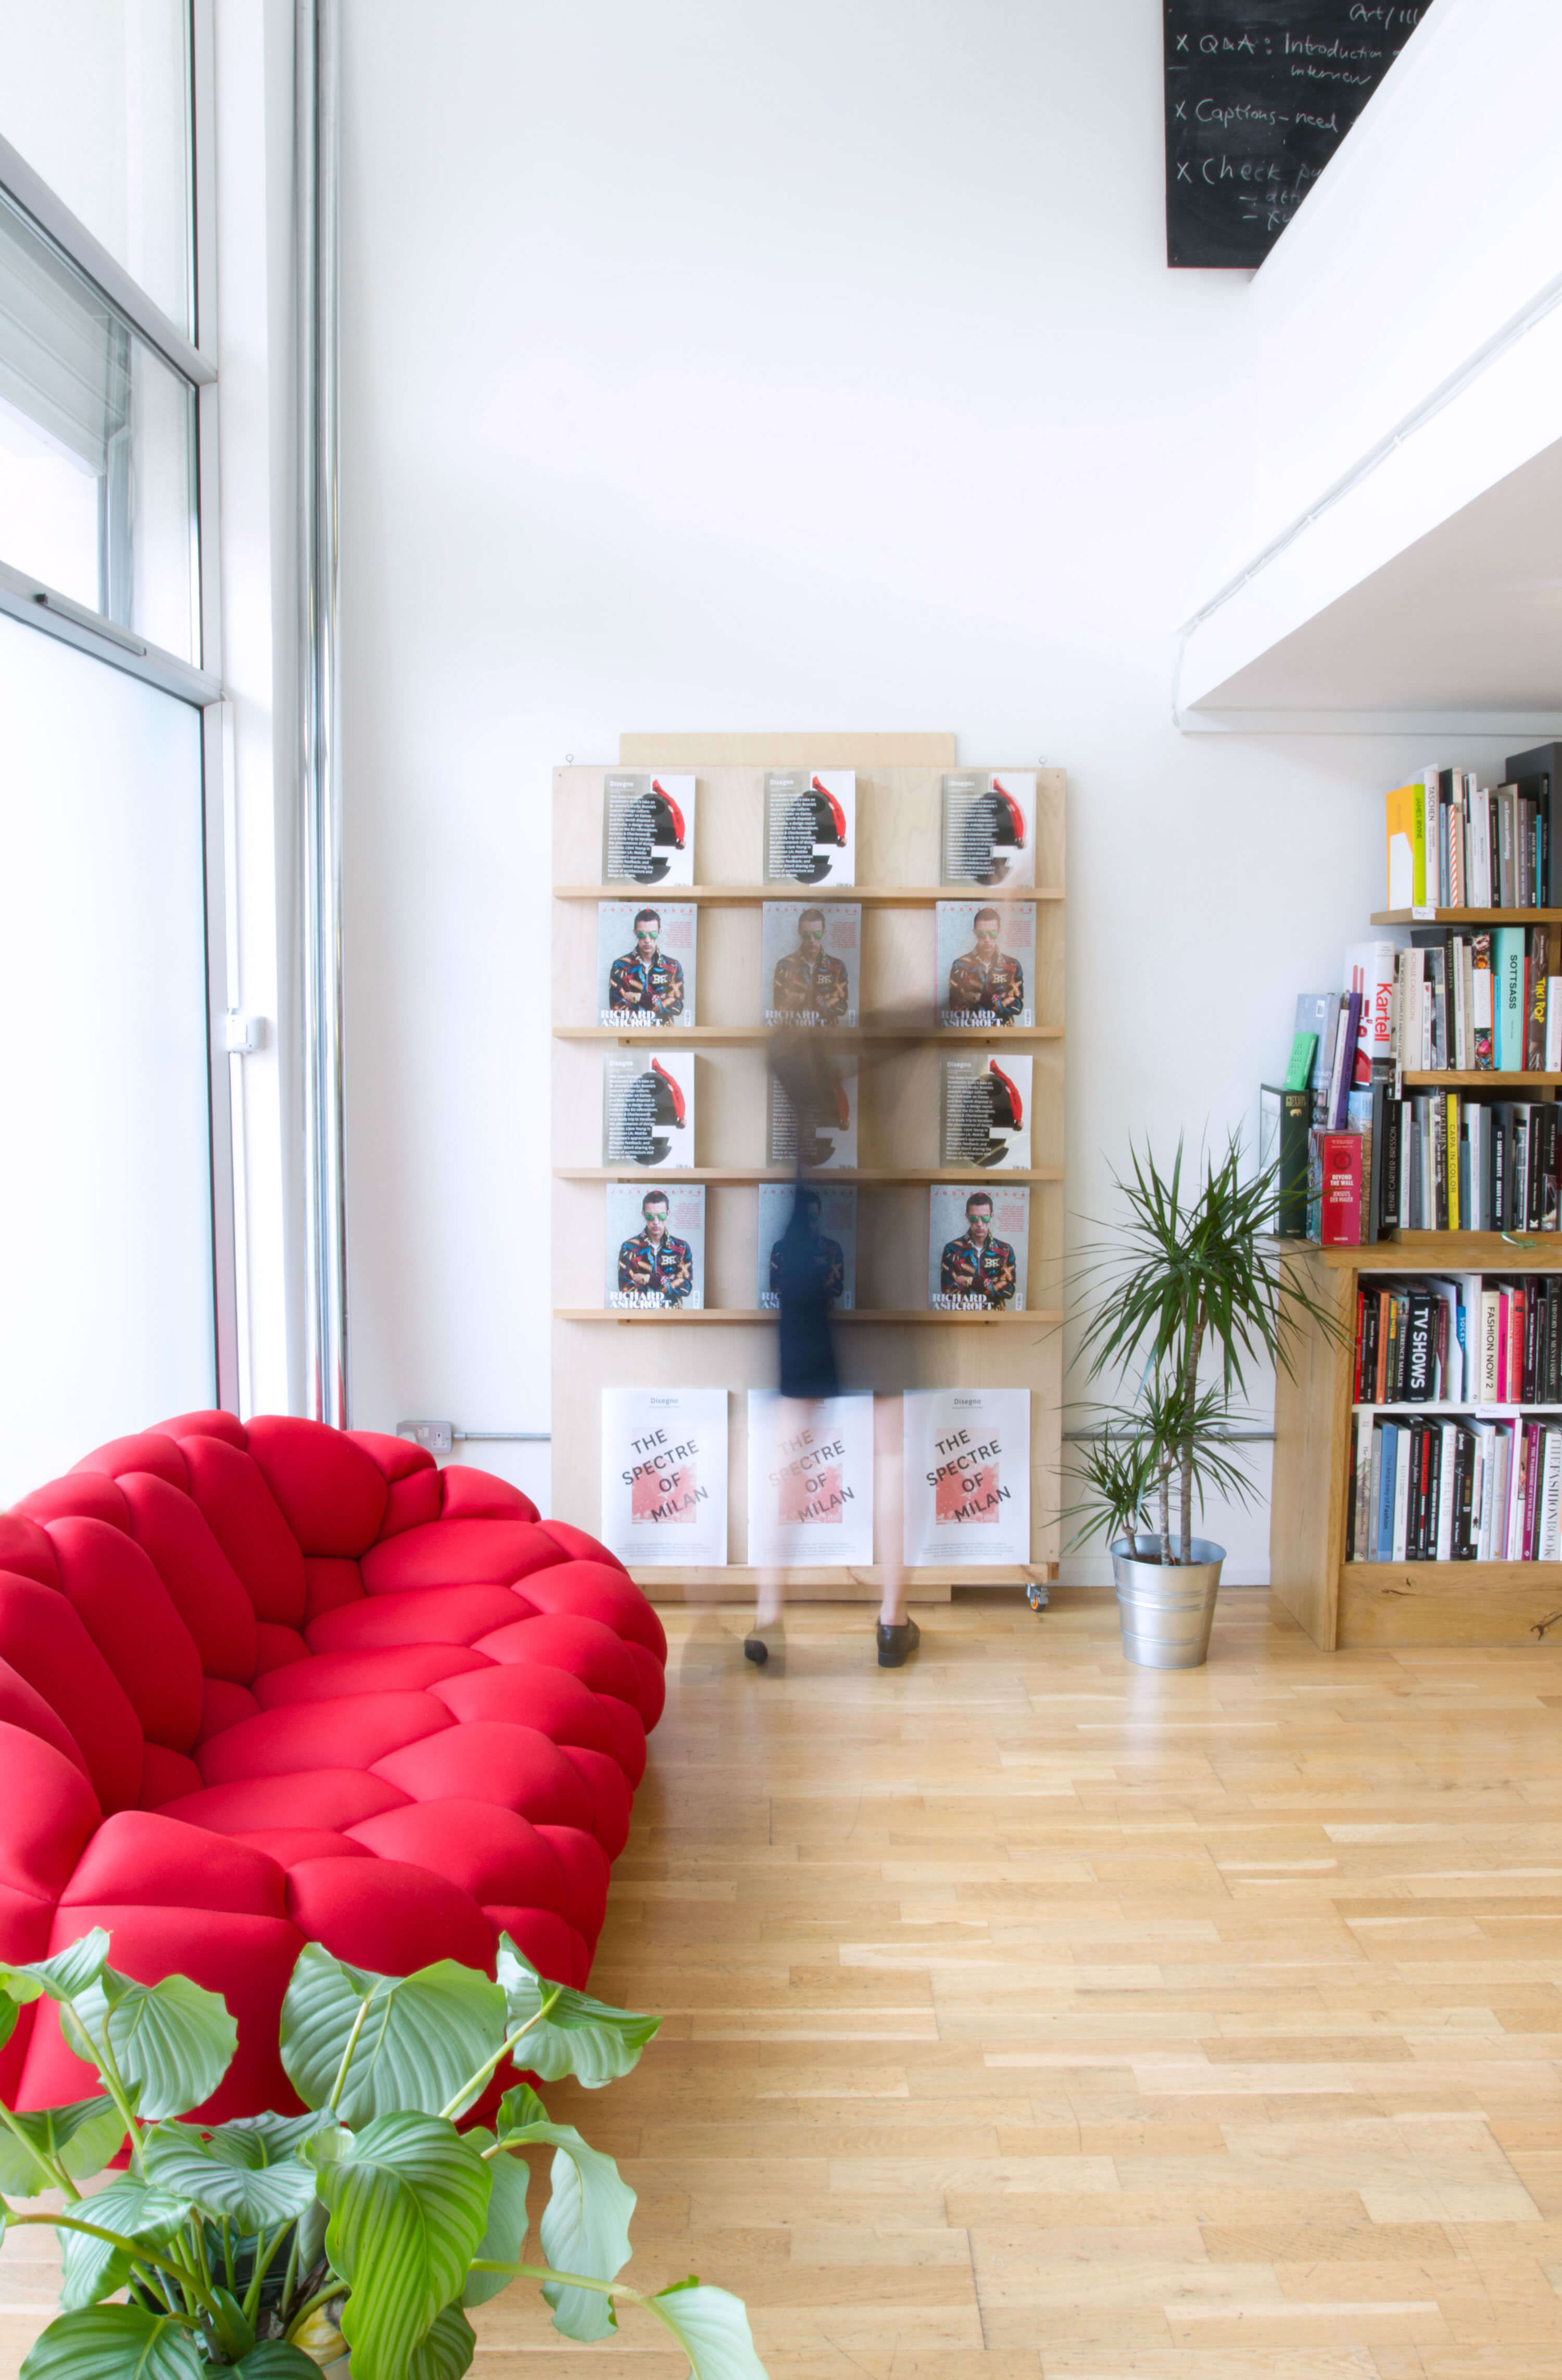 The Tack Press office is a shared creative space between Jocks & Nerds, Disegno and Tack Studio.